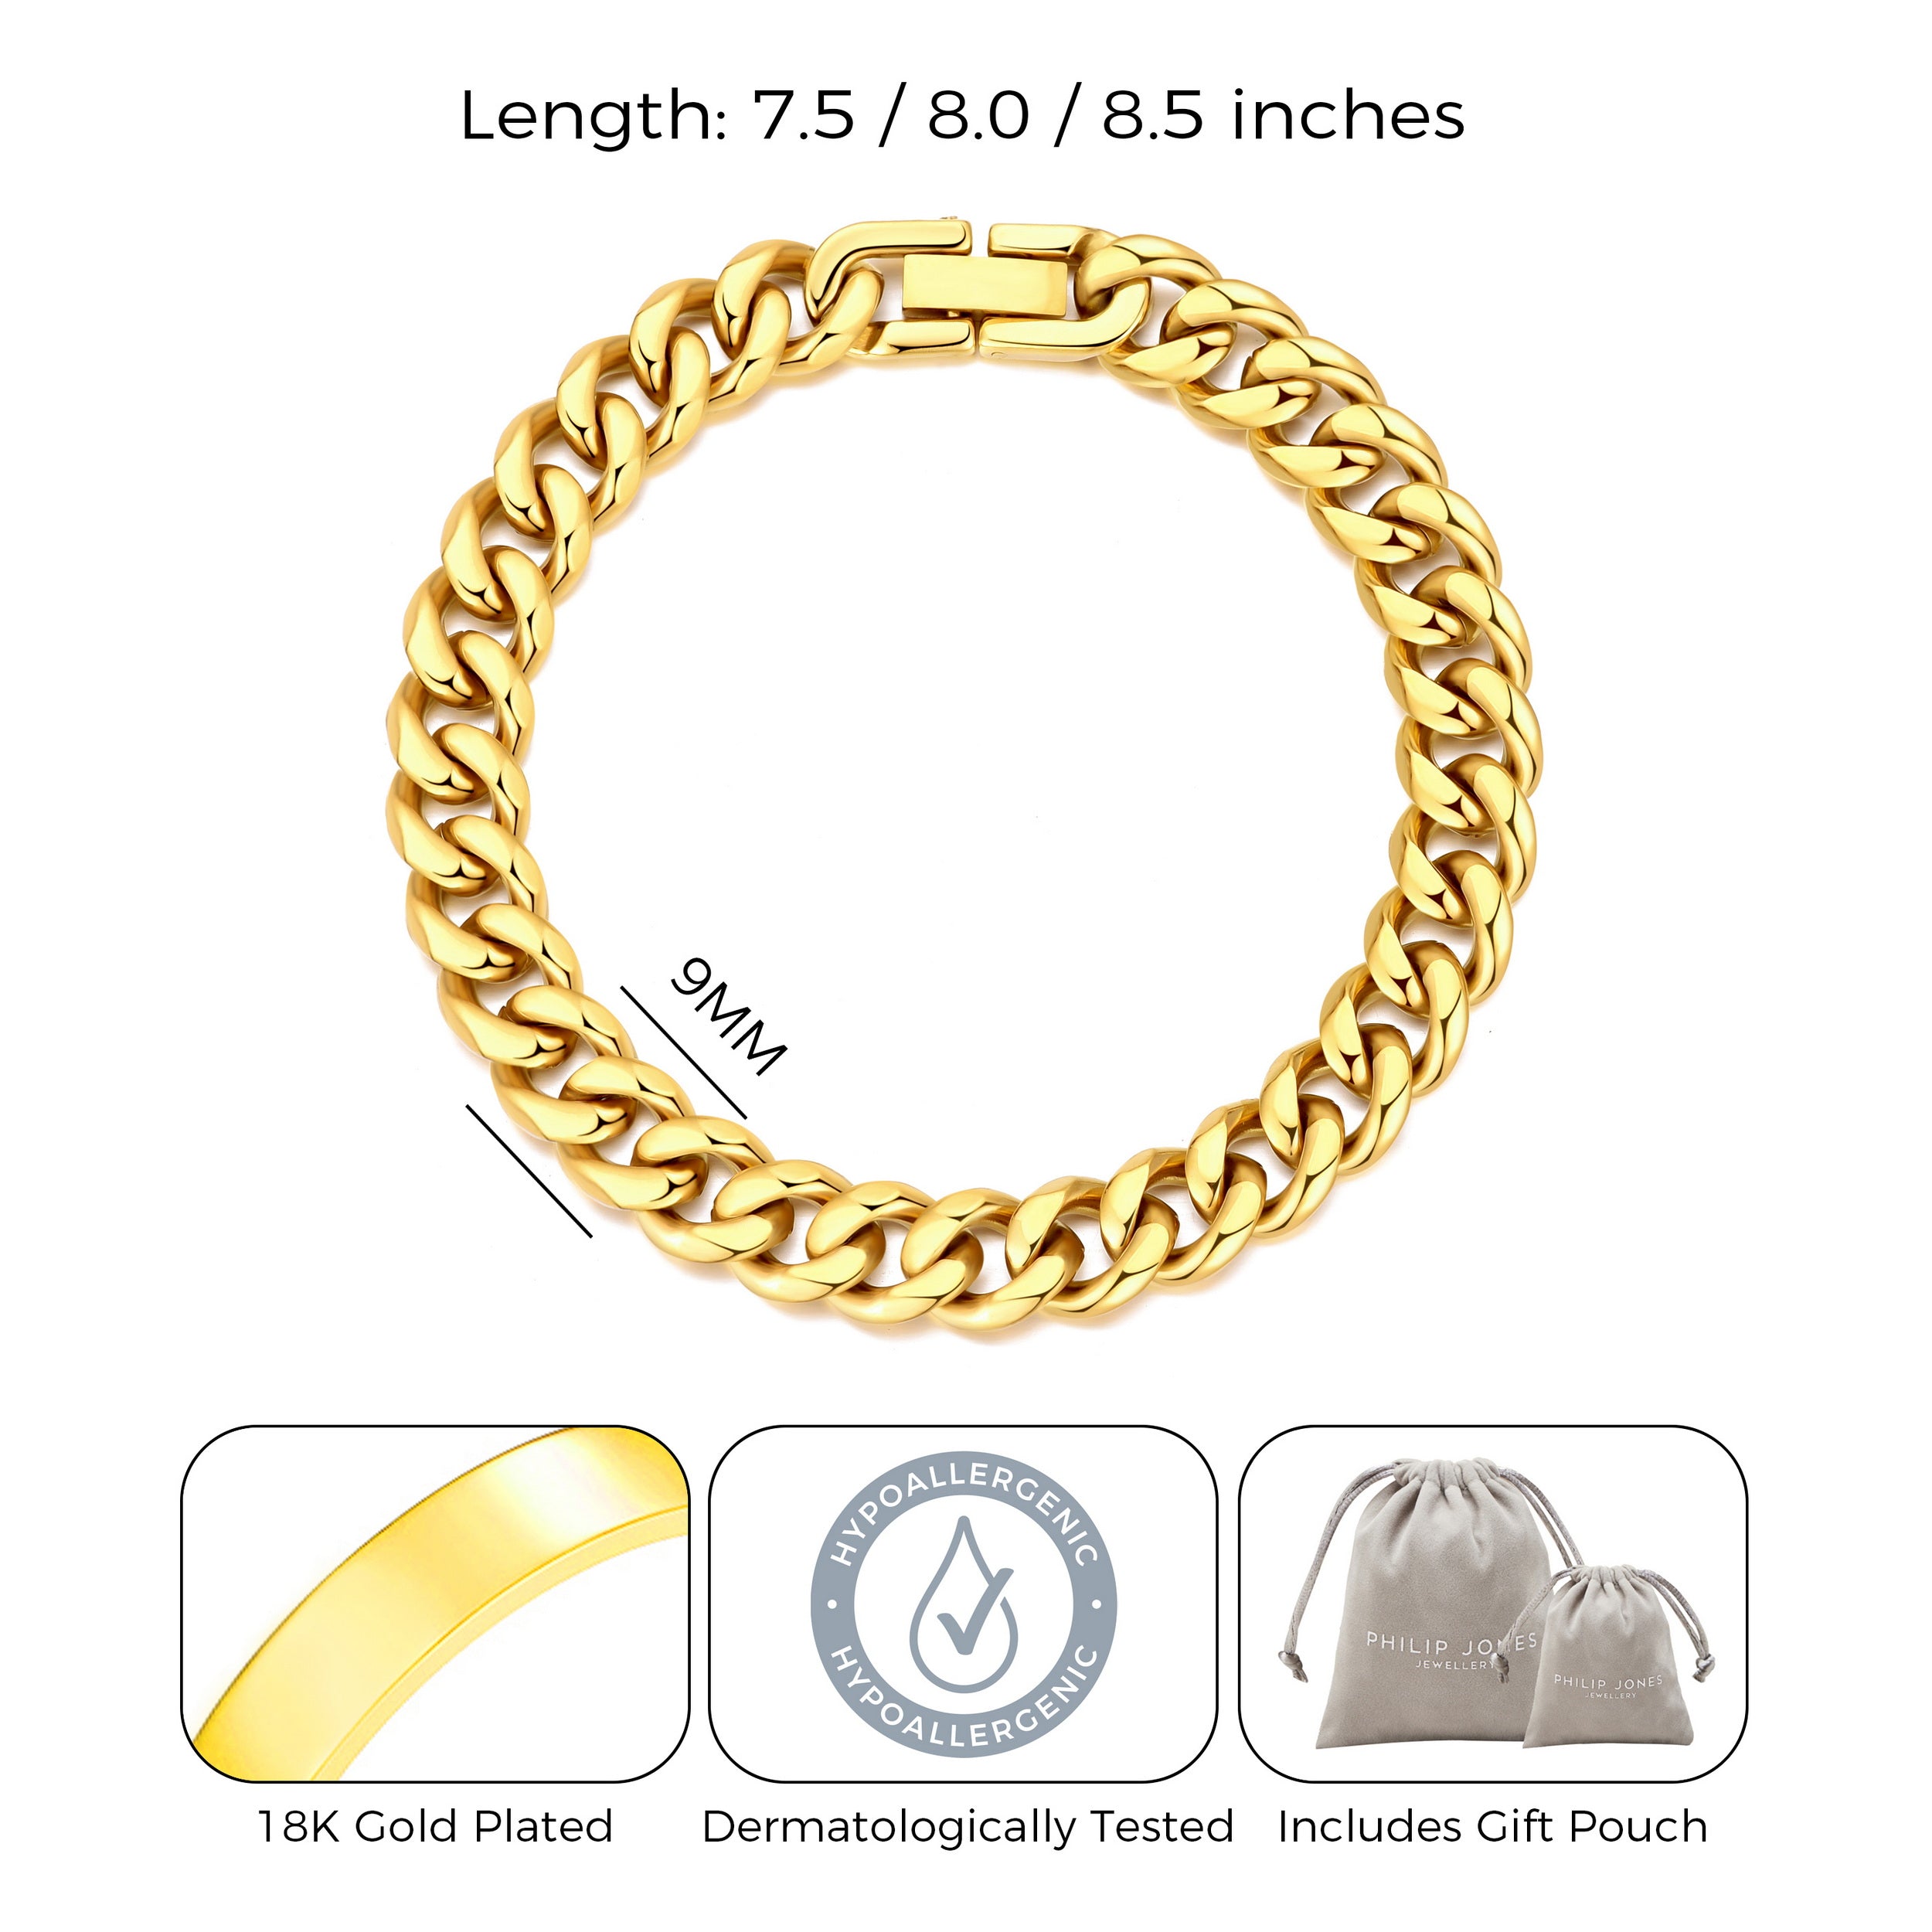 Men's 9mm Gold Plated Stainless Steel 7.5-8.5 Inch Curb Chain Bracelet